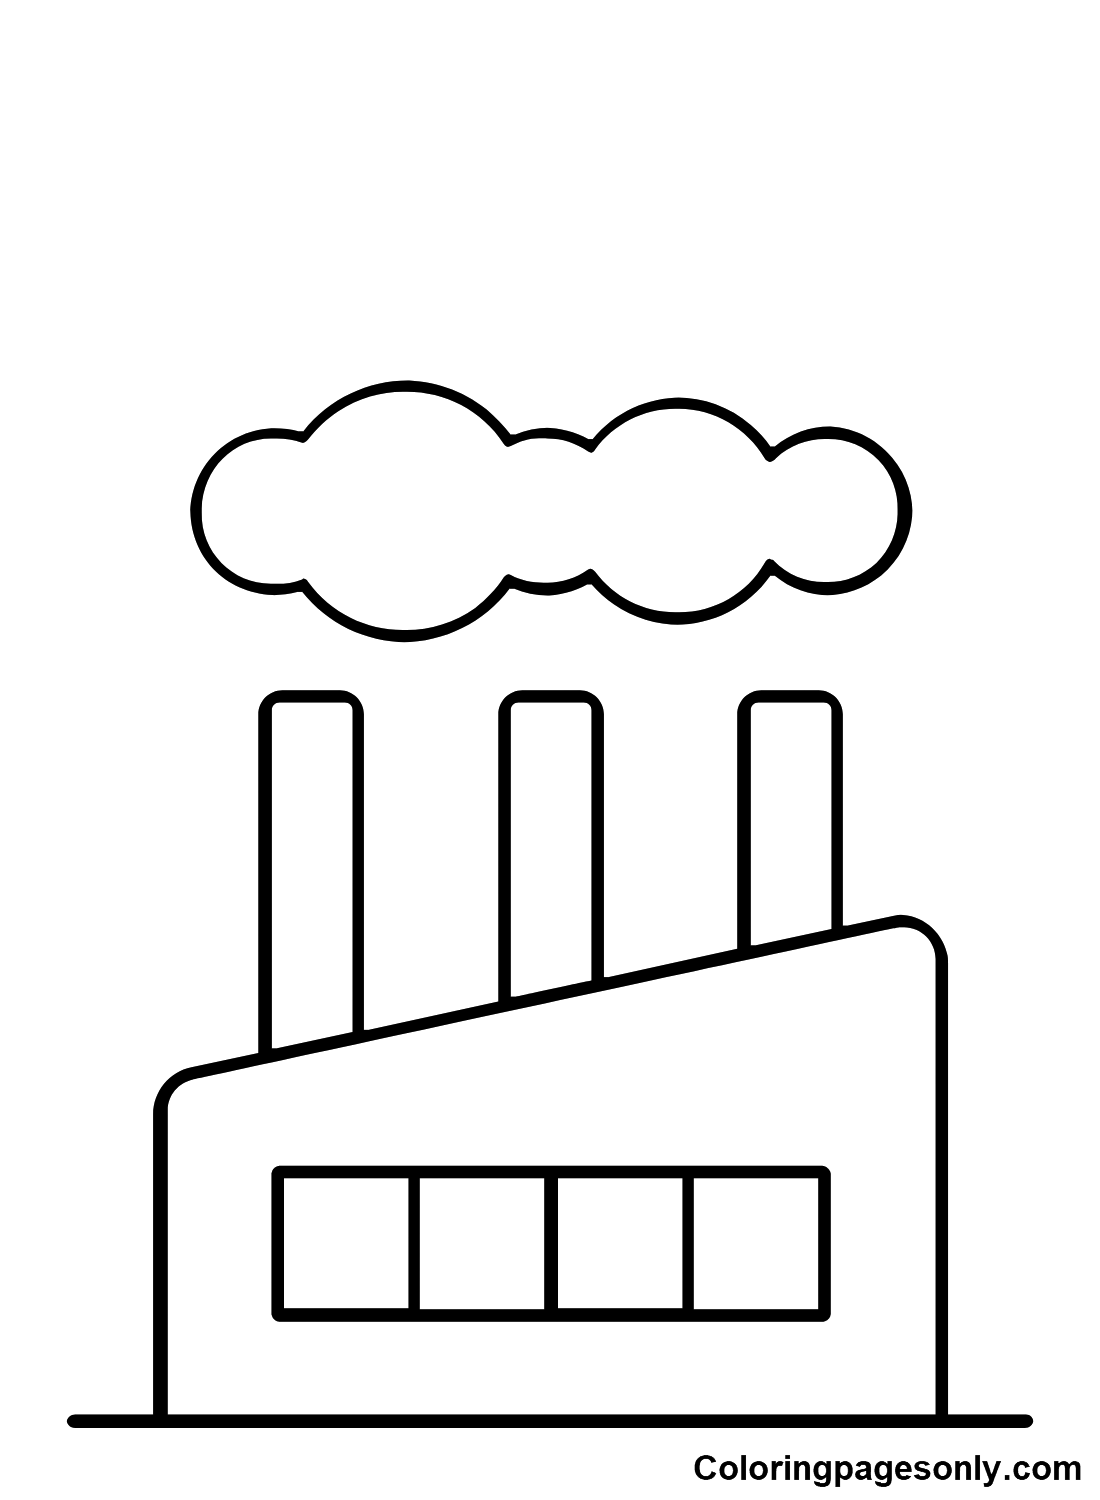 Factory Sheets Coloring Page